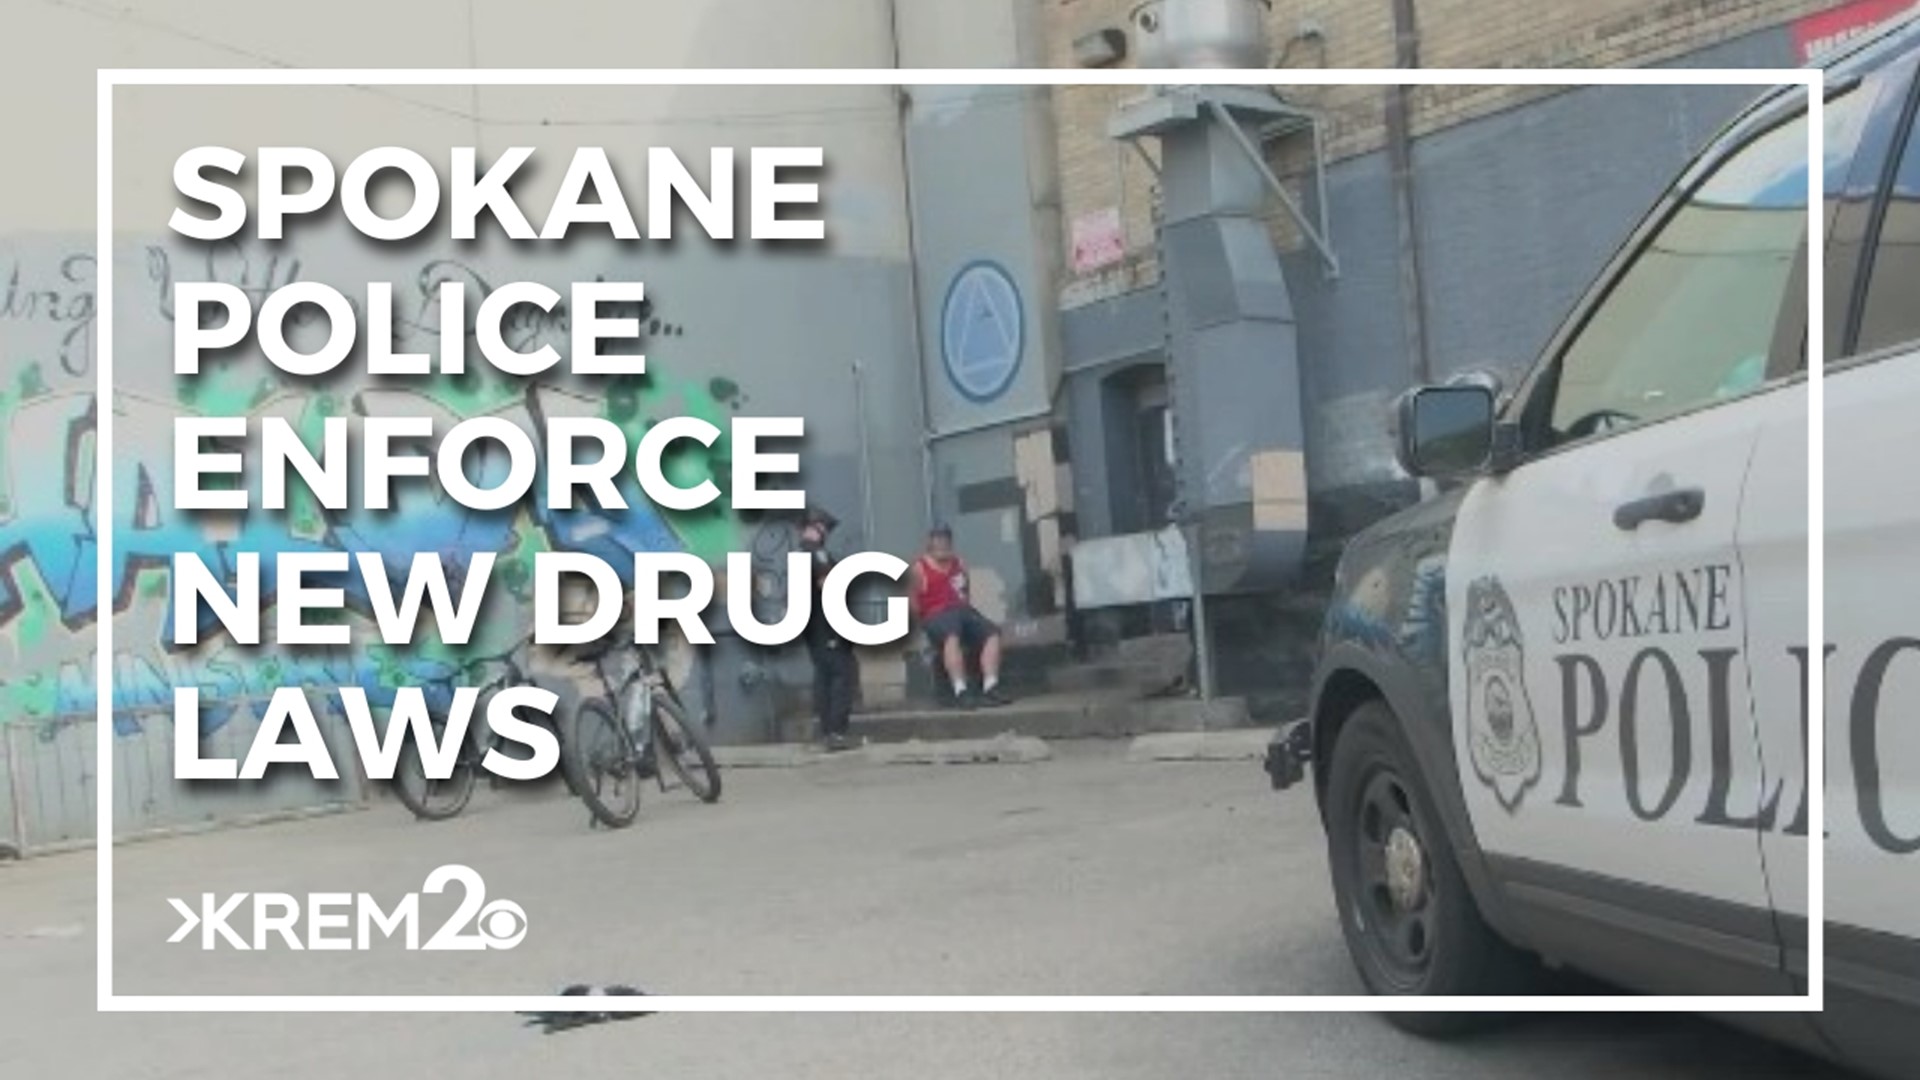 Officers are enforcing a new ordinance that makes public drug use illegal in the city of Spokane.